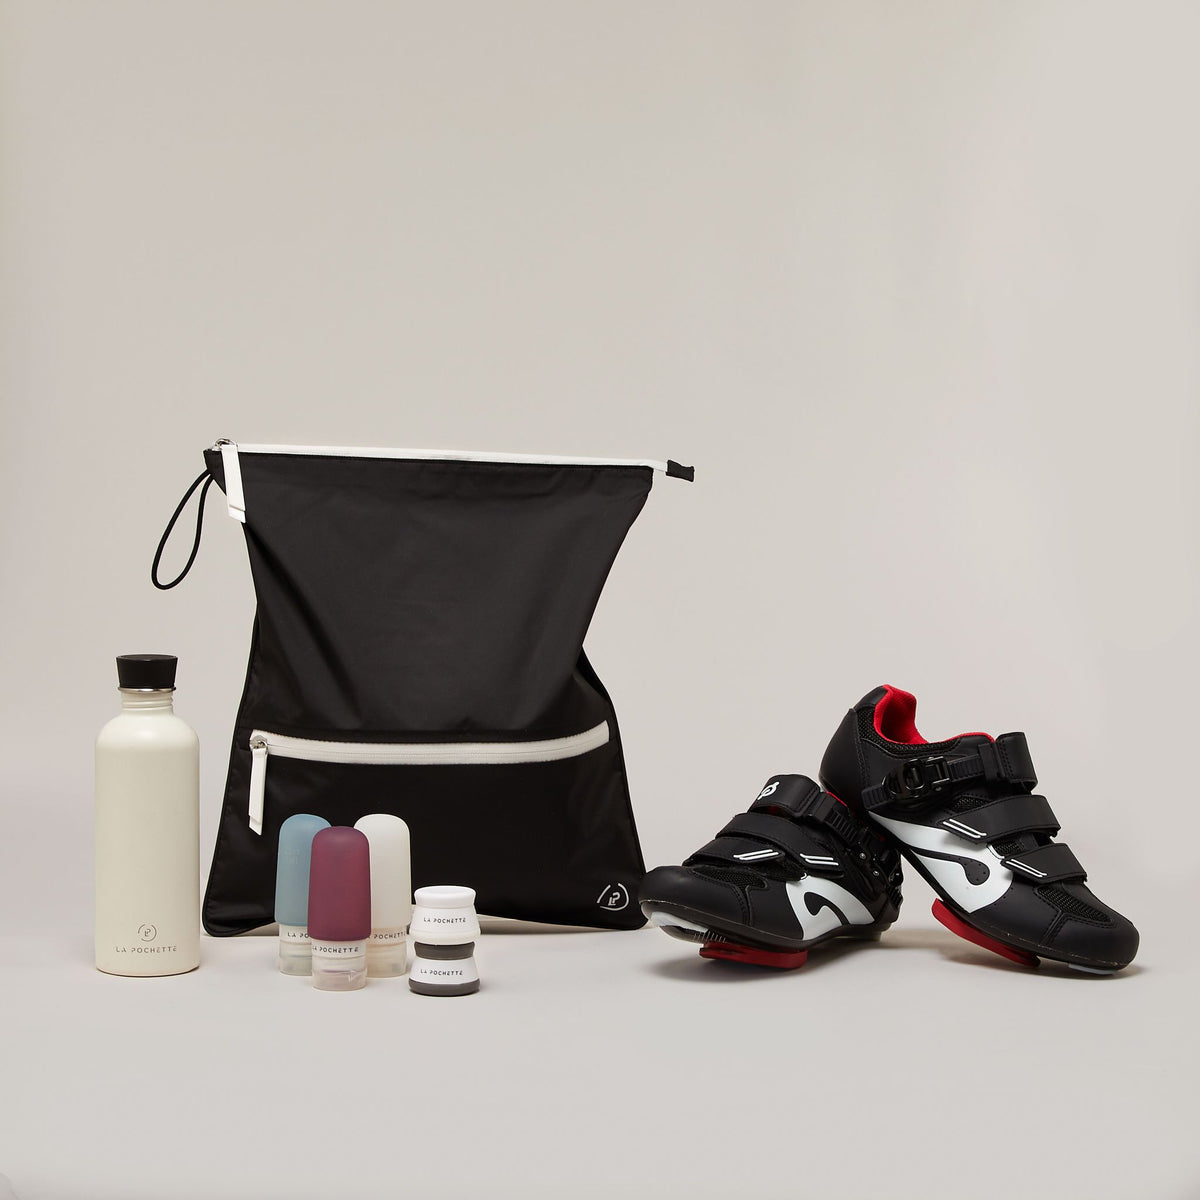 Ink White Sweat Bag with travel pot and bottles shown with a pair of cycling cleats and water bottle